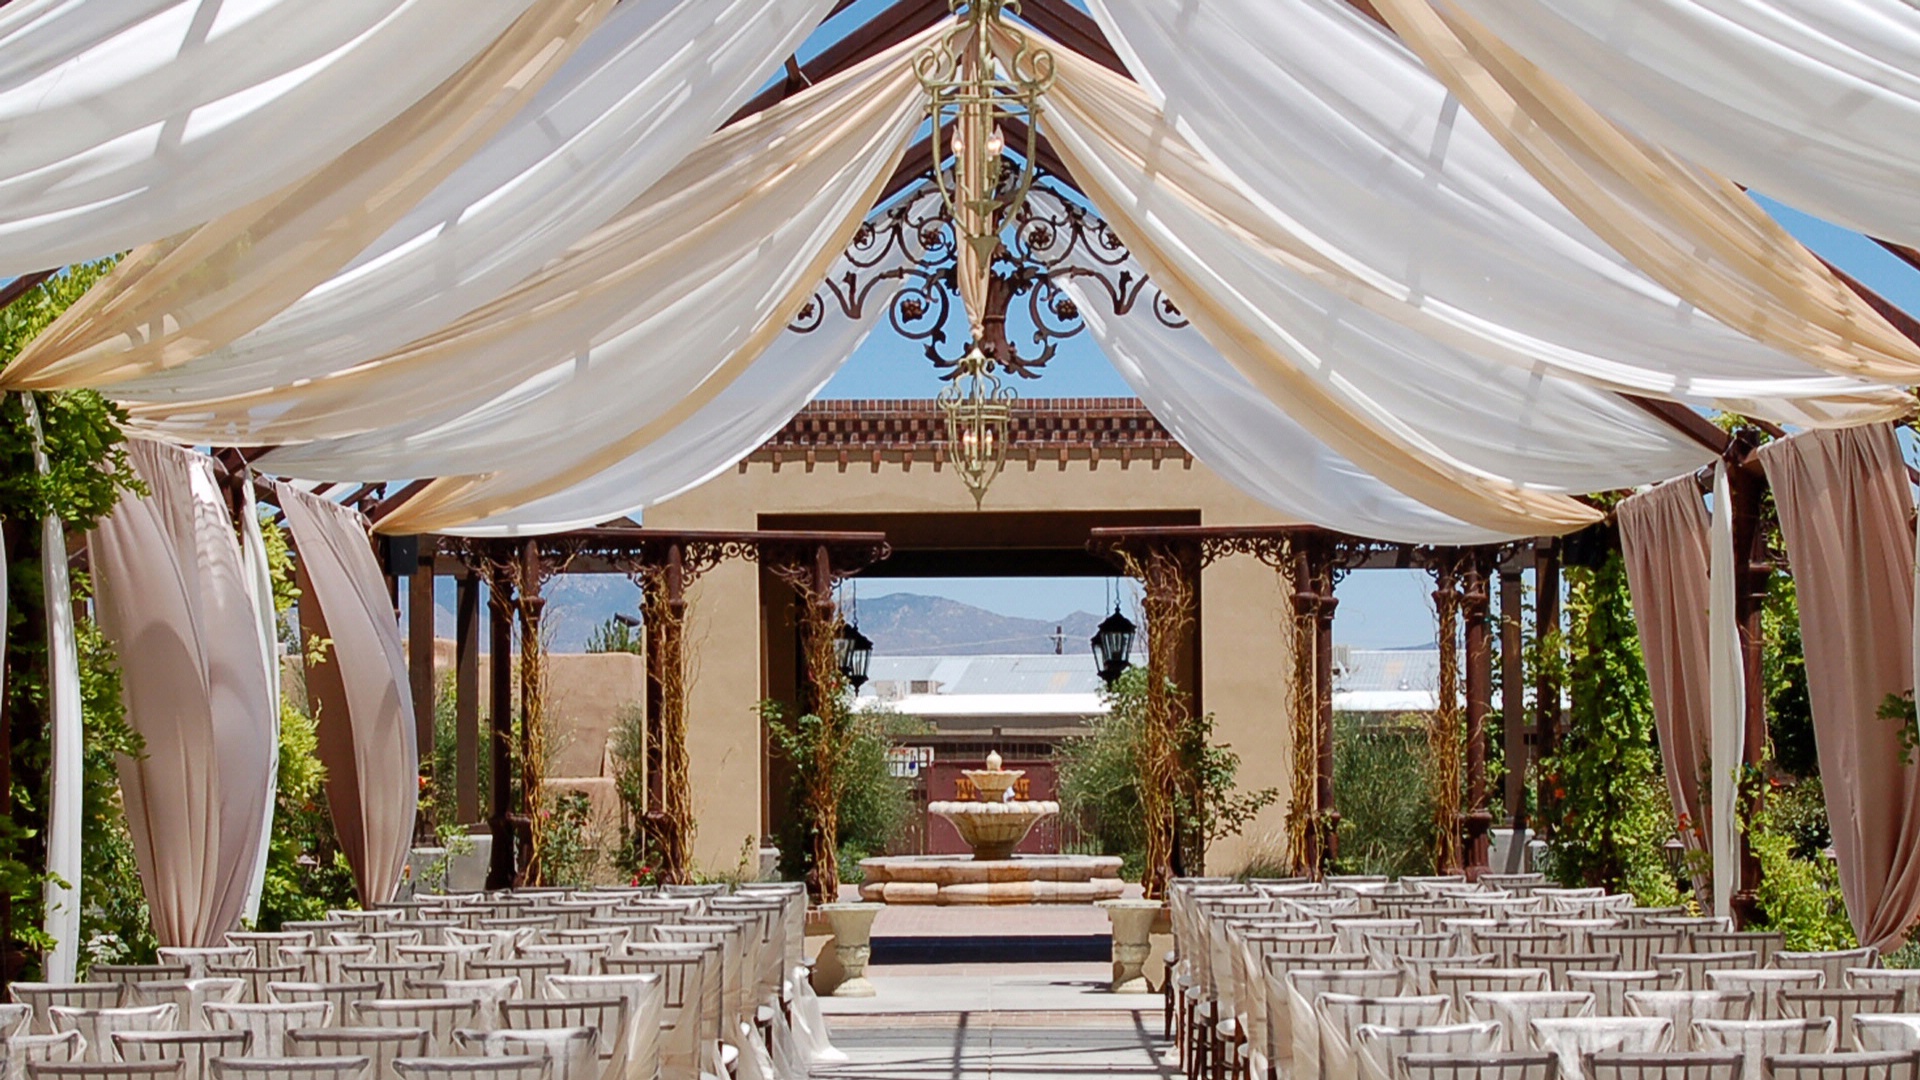 Great Wedding Venues In Albuquerque Nm in the world The ultimate guide 